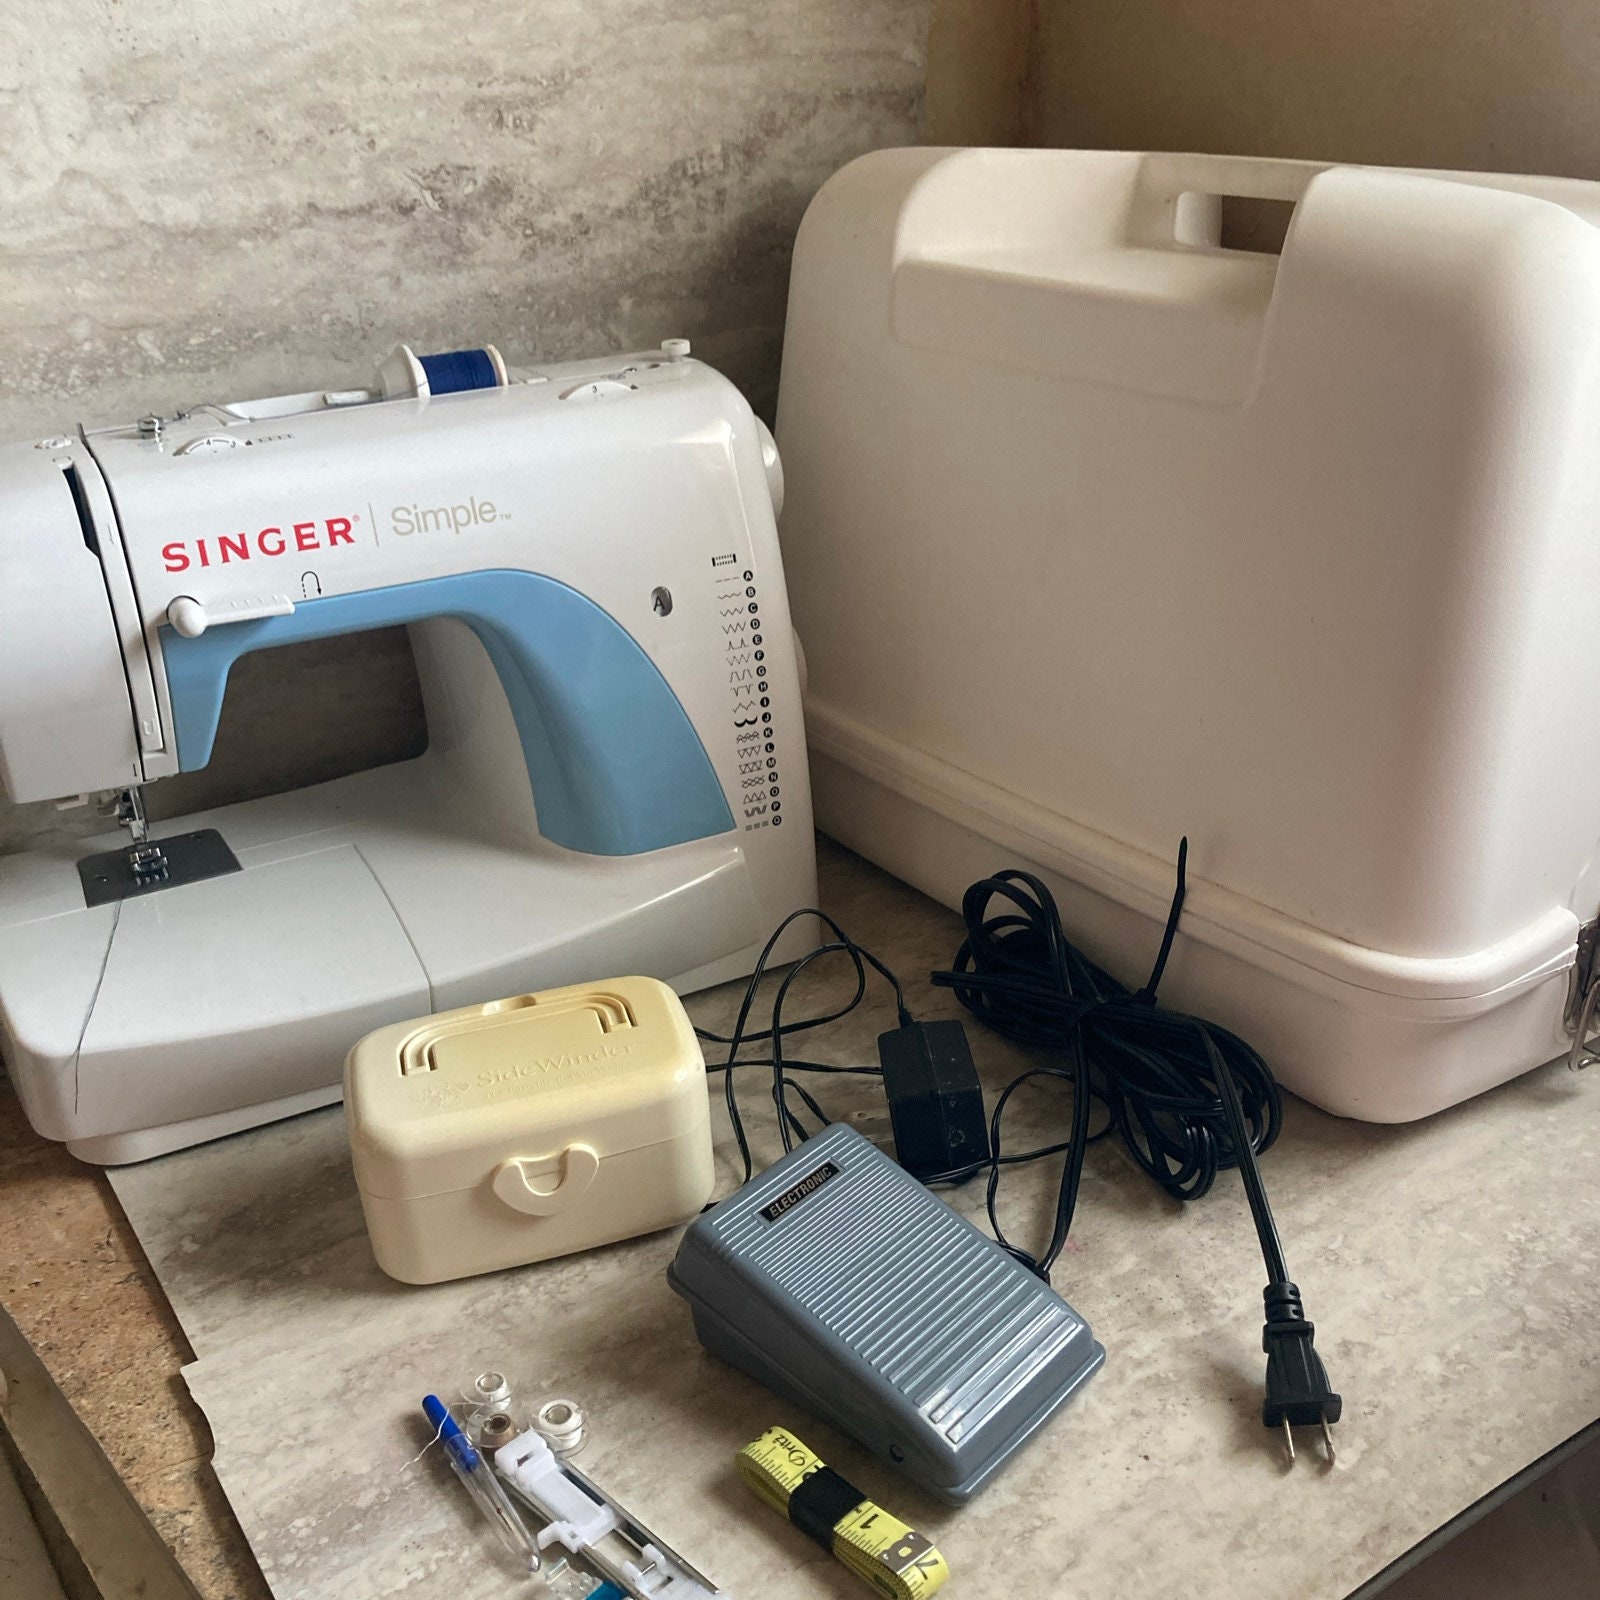 Singer Simple 3116 Electric Sewing Machine no Power, Pedal or